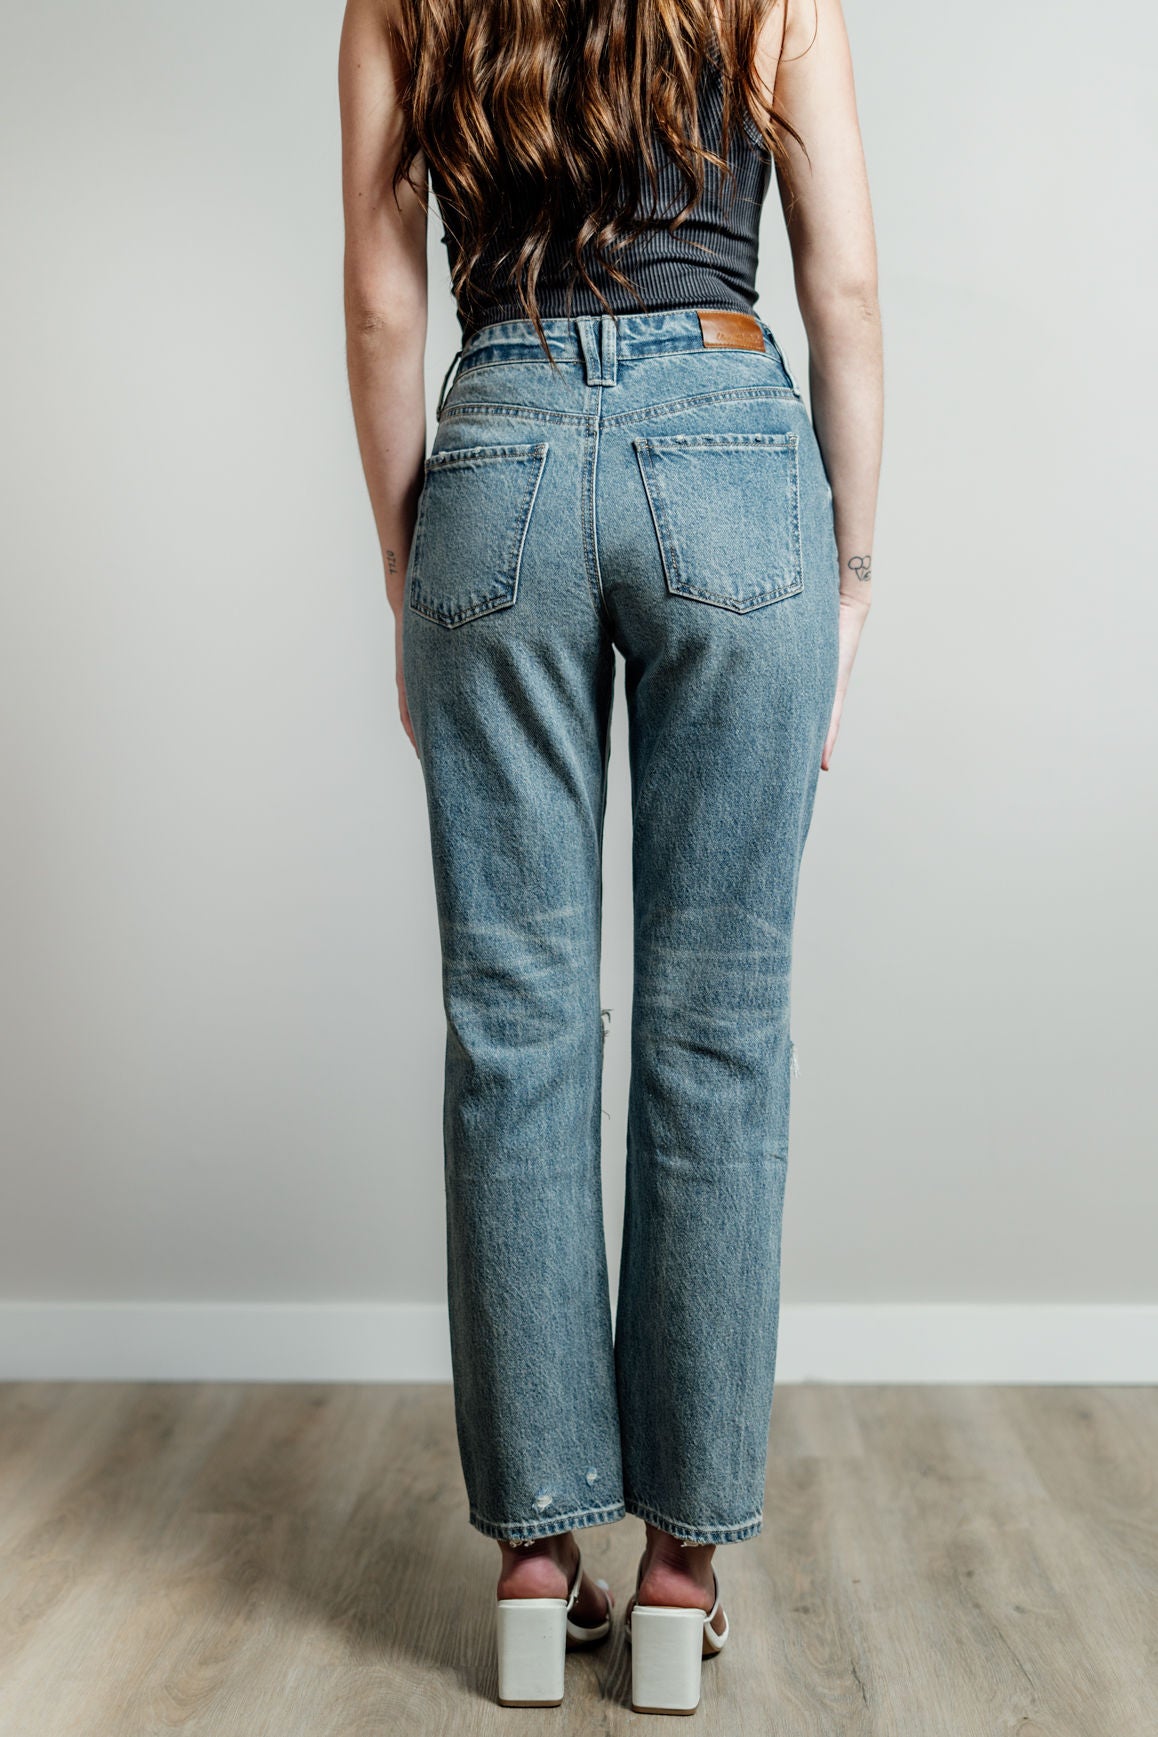 The Willa Rogue Mom Jeans